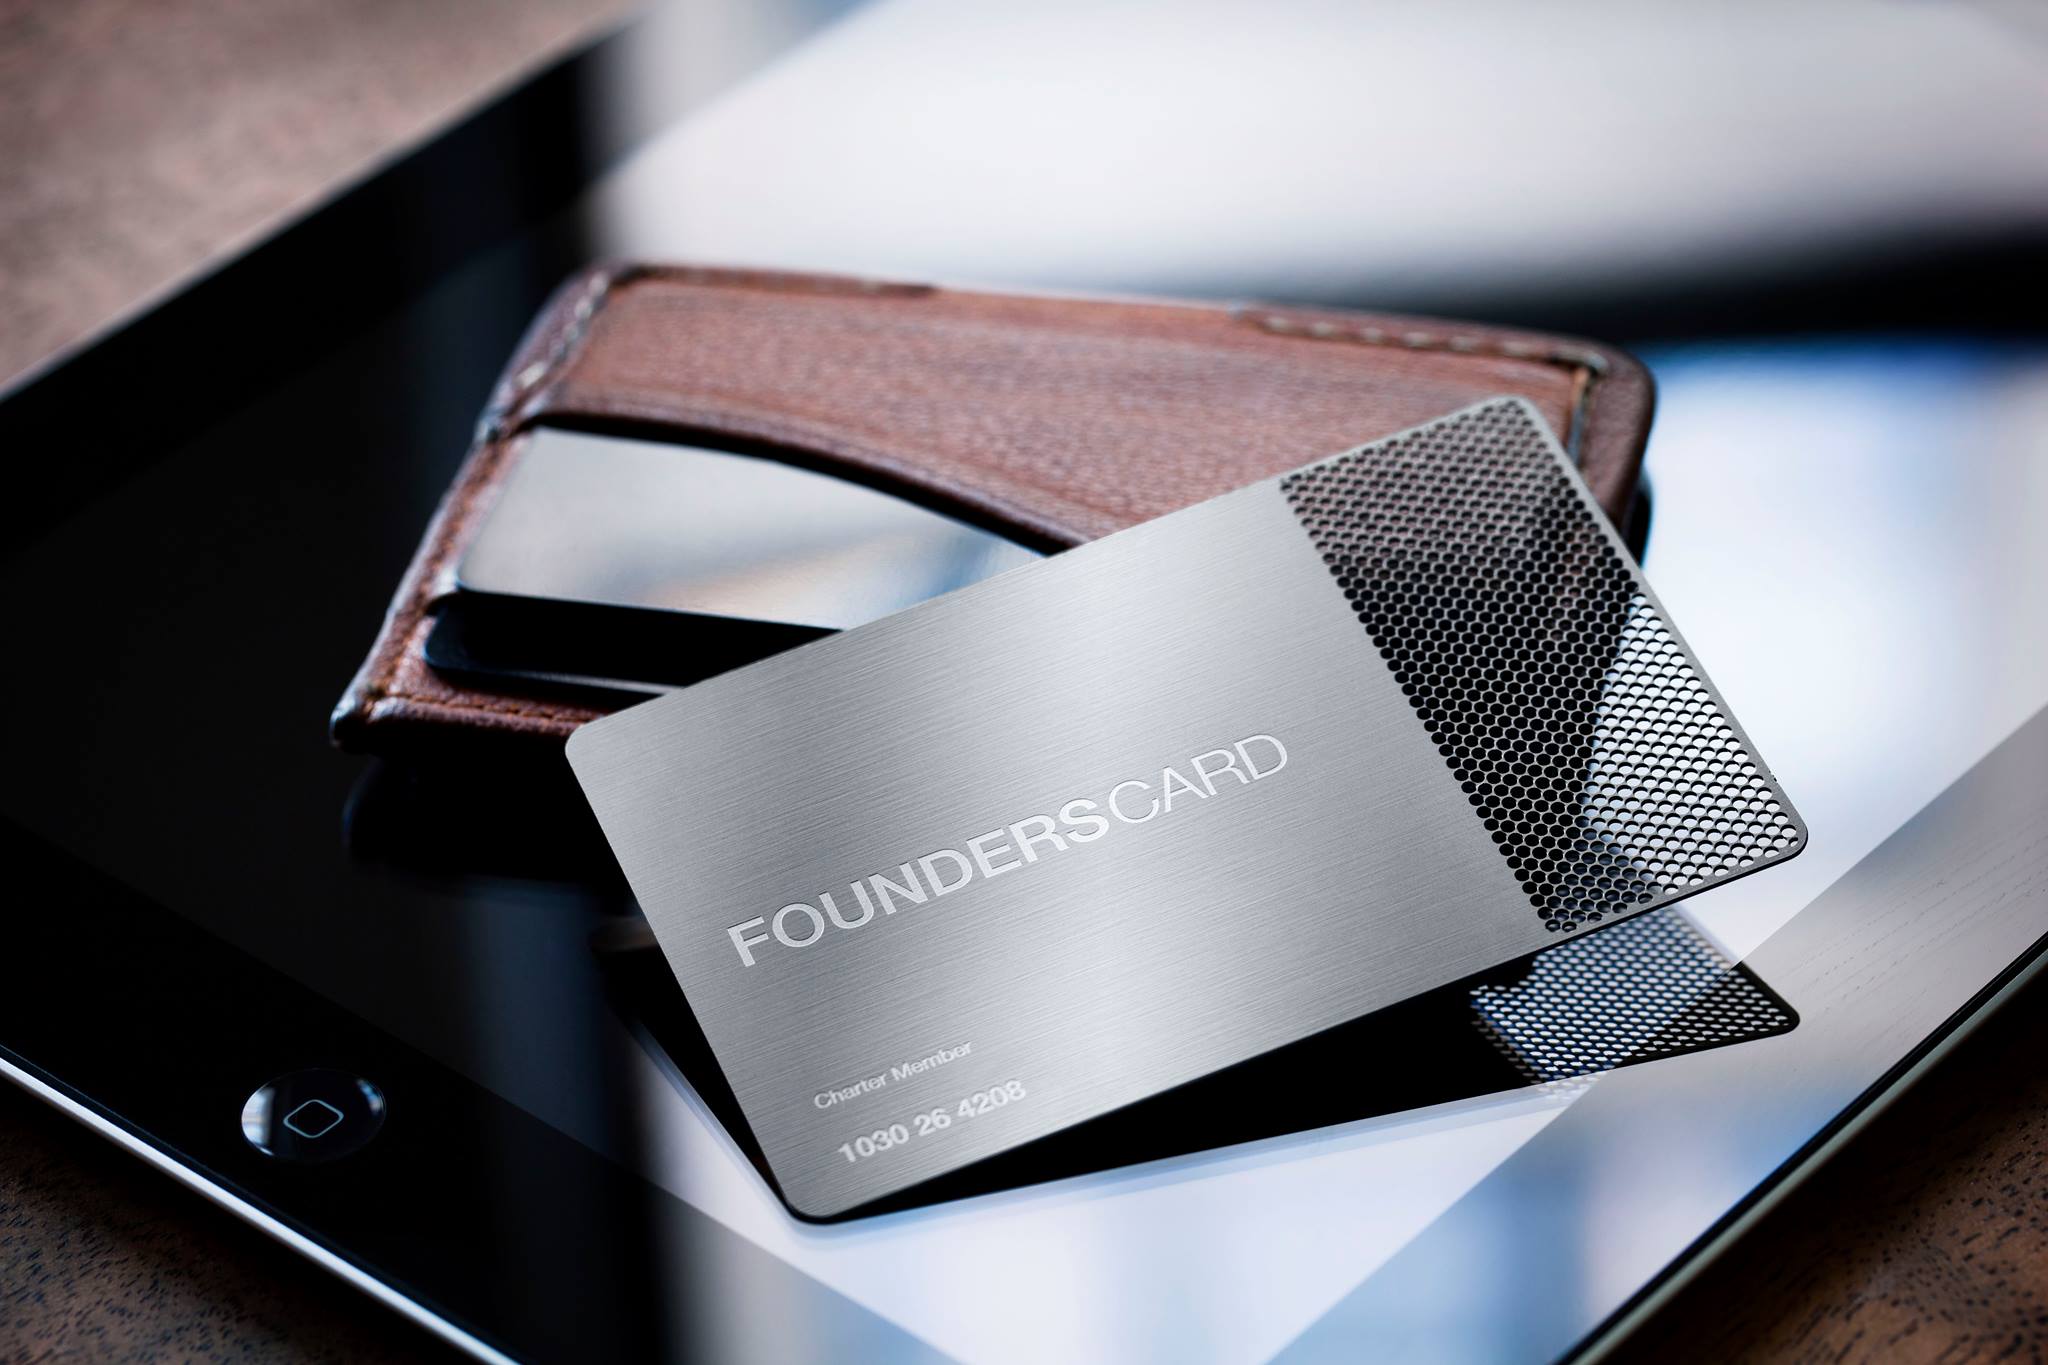 FoundersCard with wallet and tablet